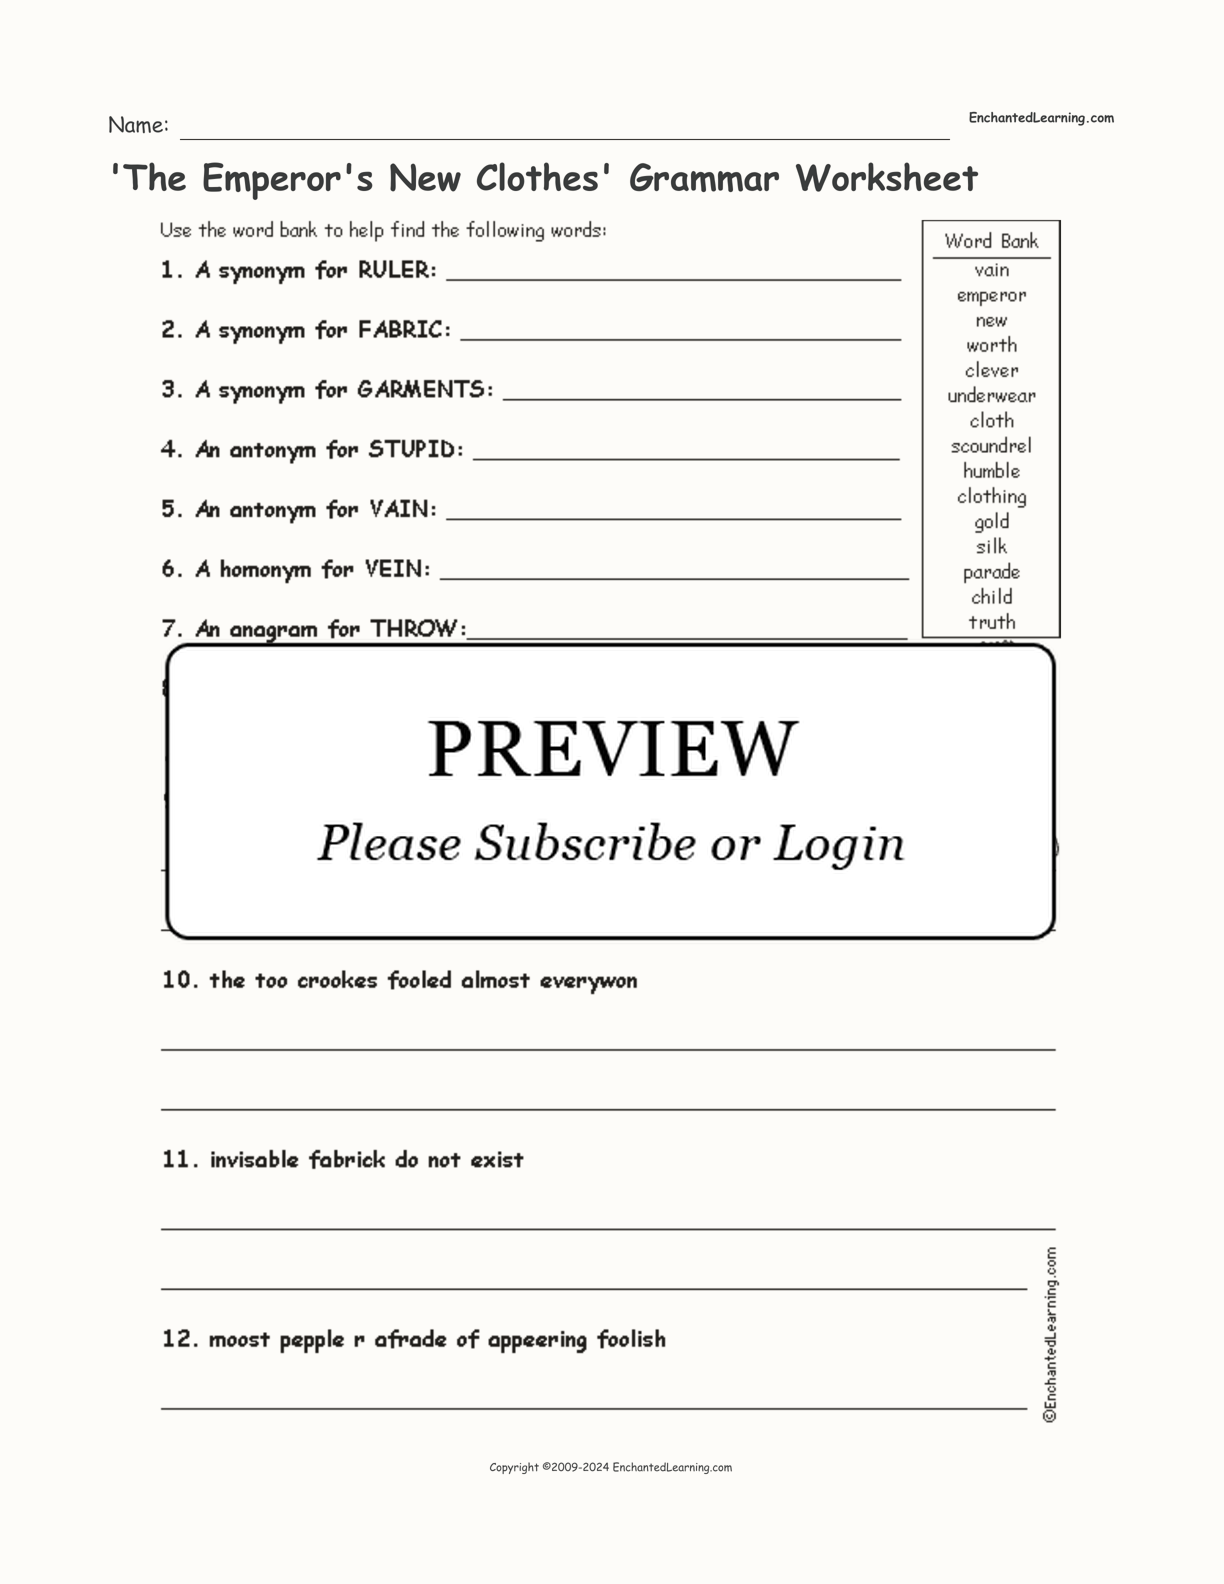 'The Emperor's New Clothes' Grammar Worksheet interactive worksheet page 1